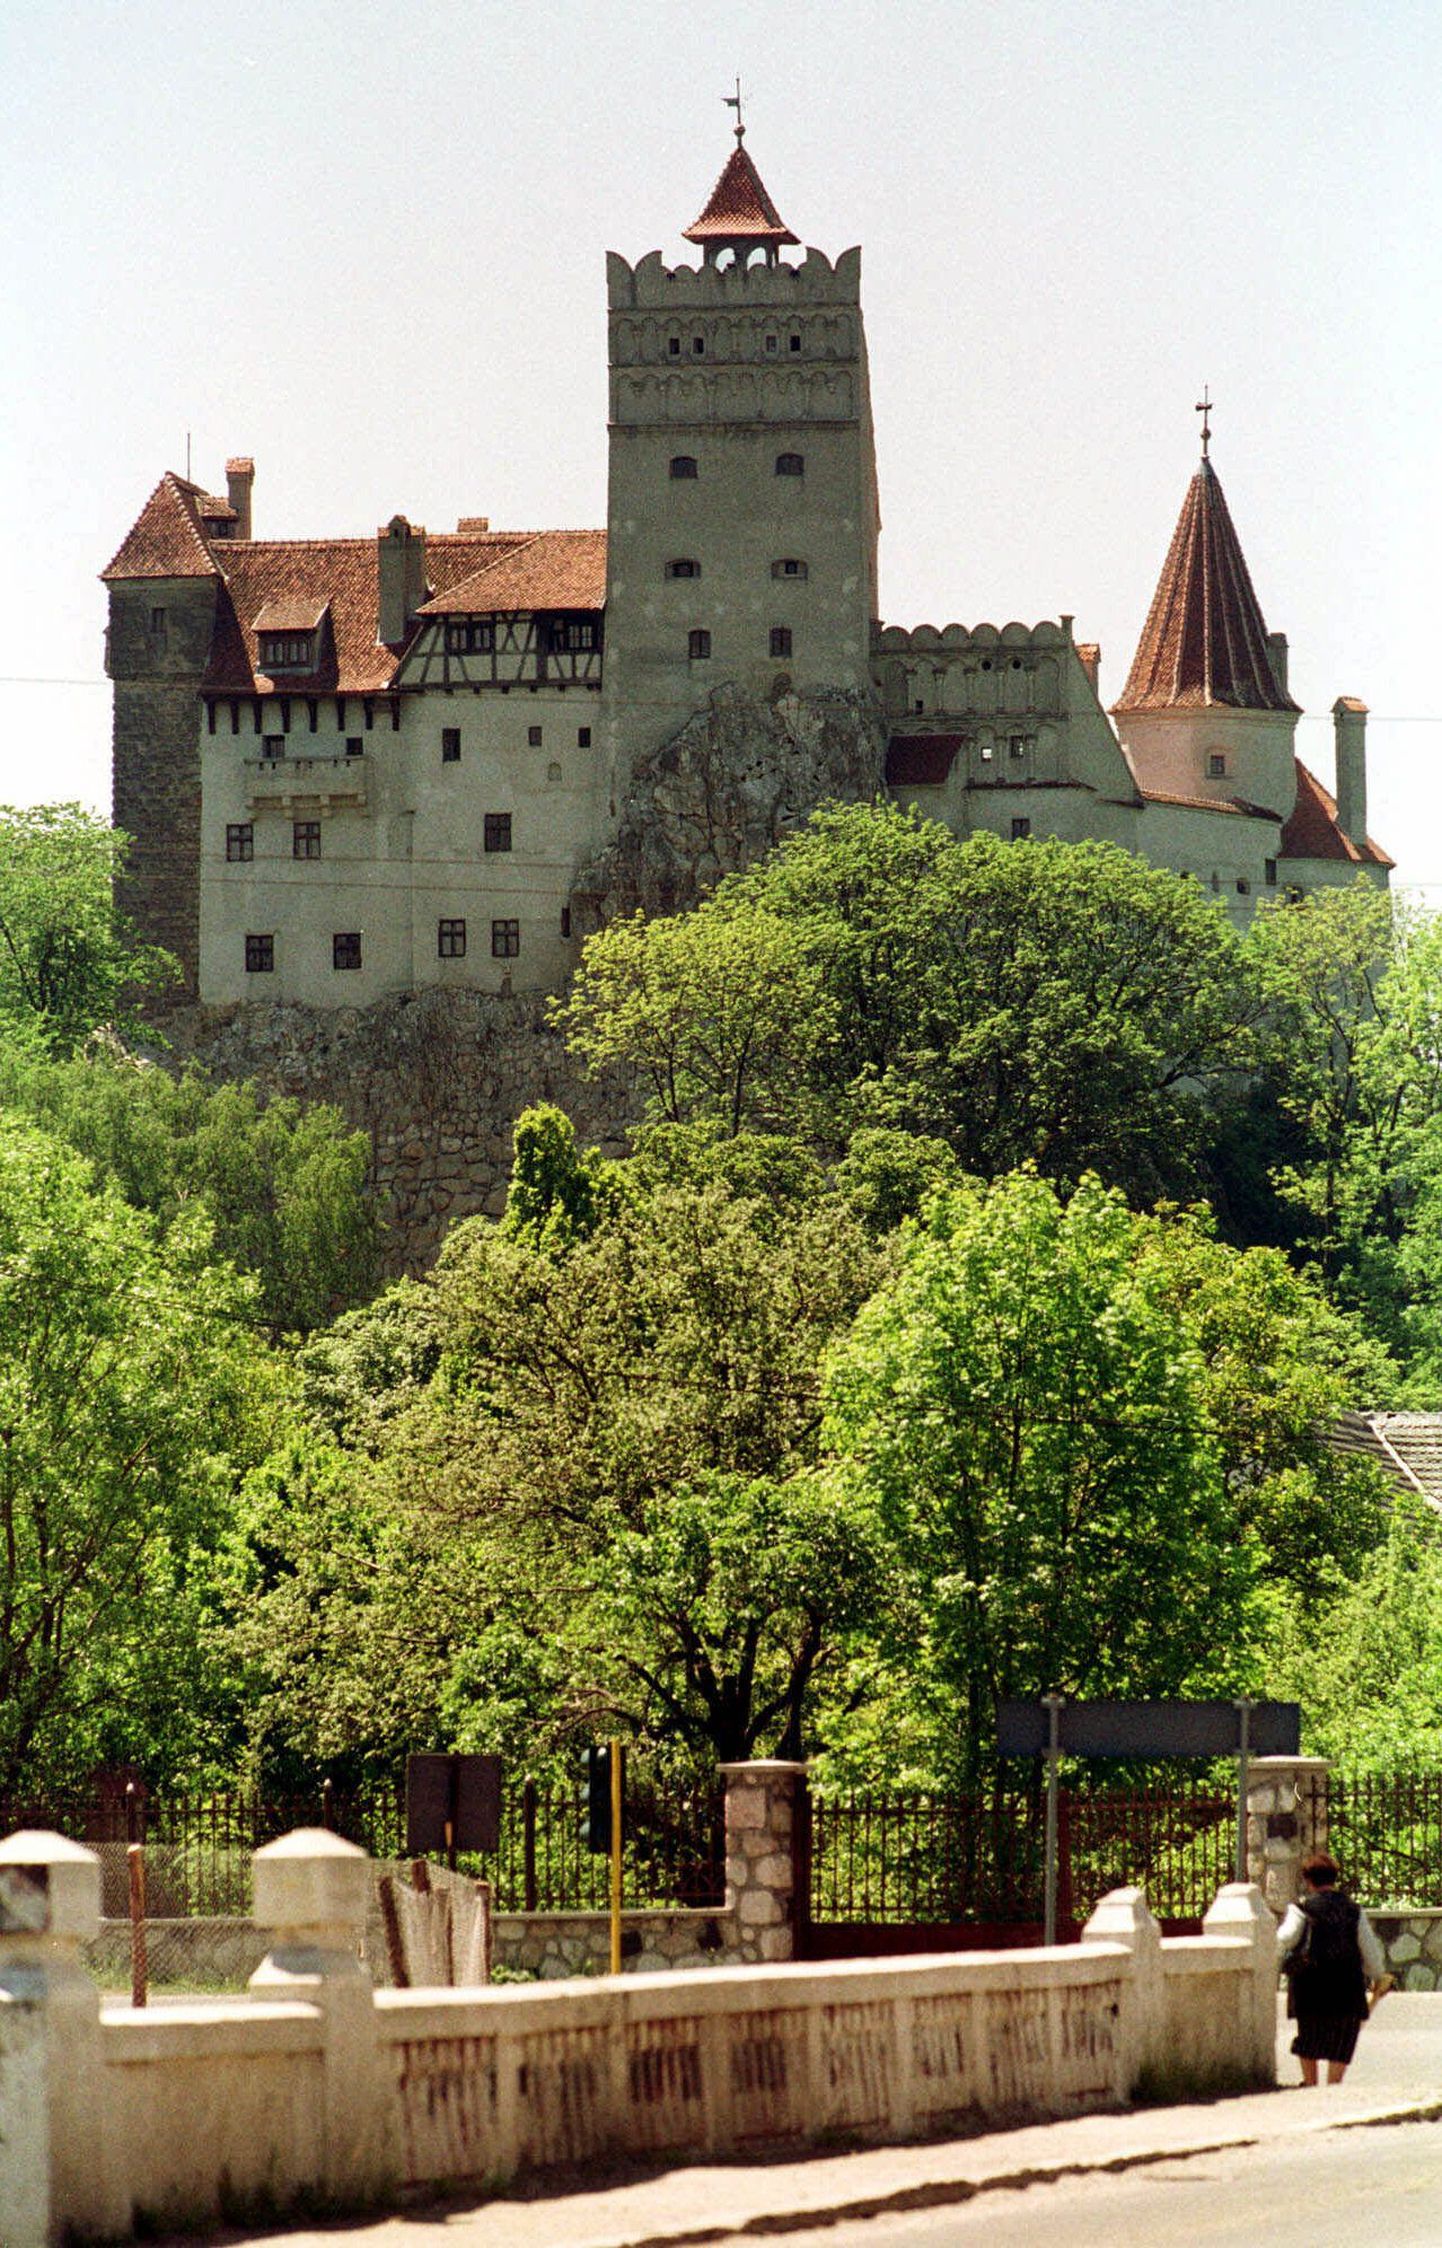 ** FILE **  Bran Castle in Transylvania, Romania is seen in this May 26, 2000 file photo. Romanian lawmakers voted Tuesday Sept. 25, 2007 that the Transylvanian fortress commonly known as Dracula's Castle was illegally returned to an heir of Romania's royal family and called on authorities to launch an investigation into the restitution. They said by law the castle should have been transferred to private ownership, before being restituted in May 2006. (AP Photo/Eugeniu Salabasev, FILE) / SCANPIX Code: 436